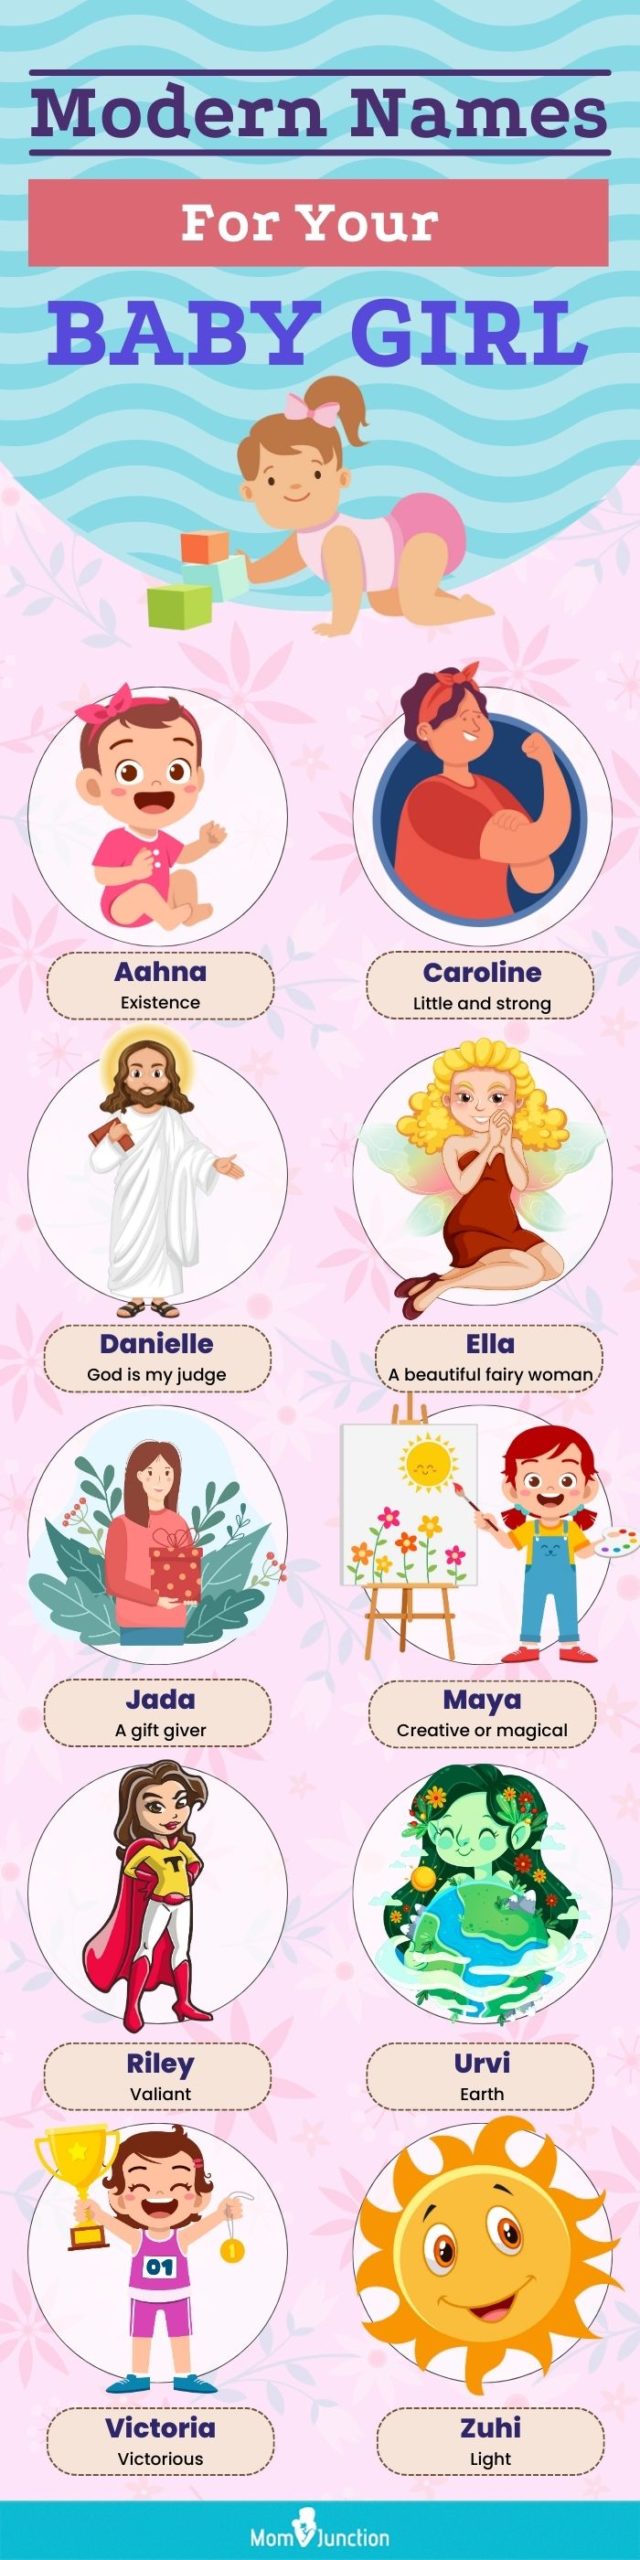 modern names for your baby girl (infographic)